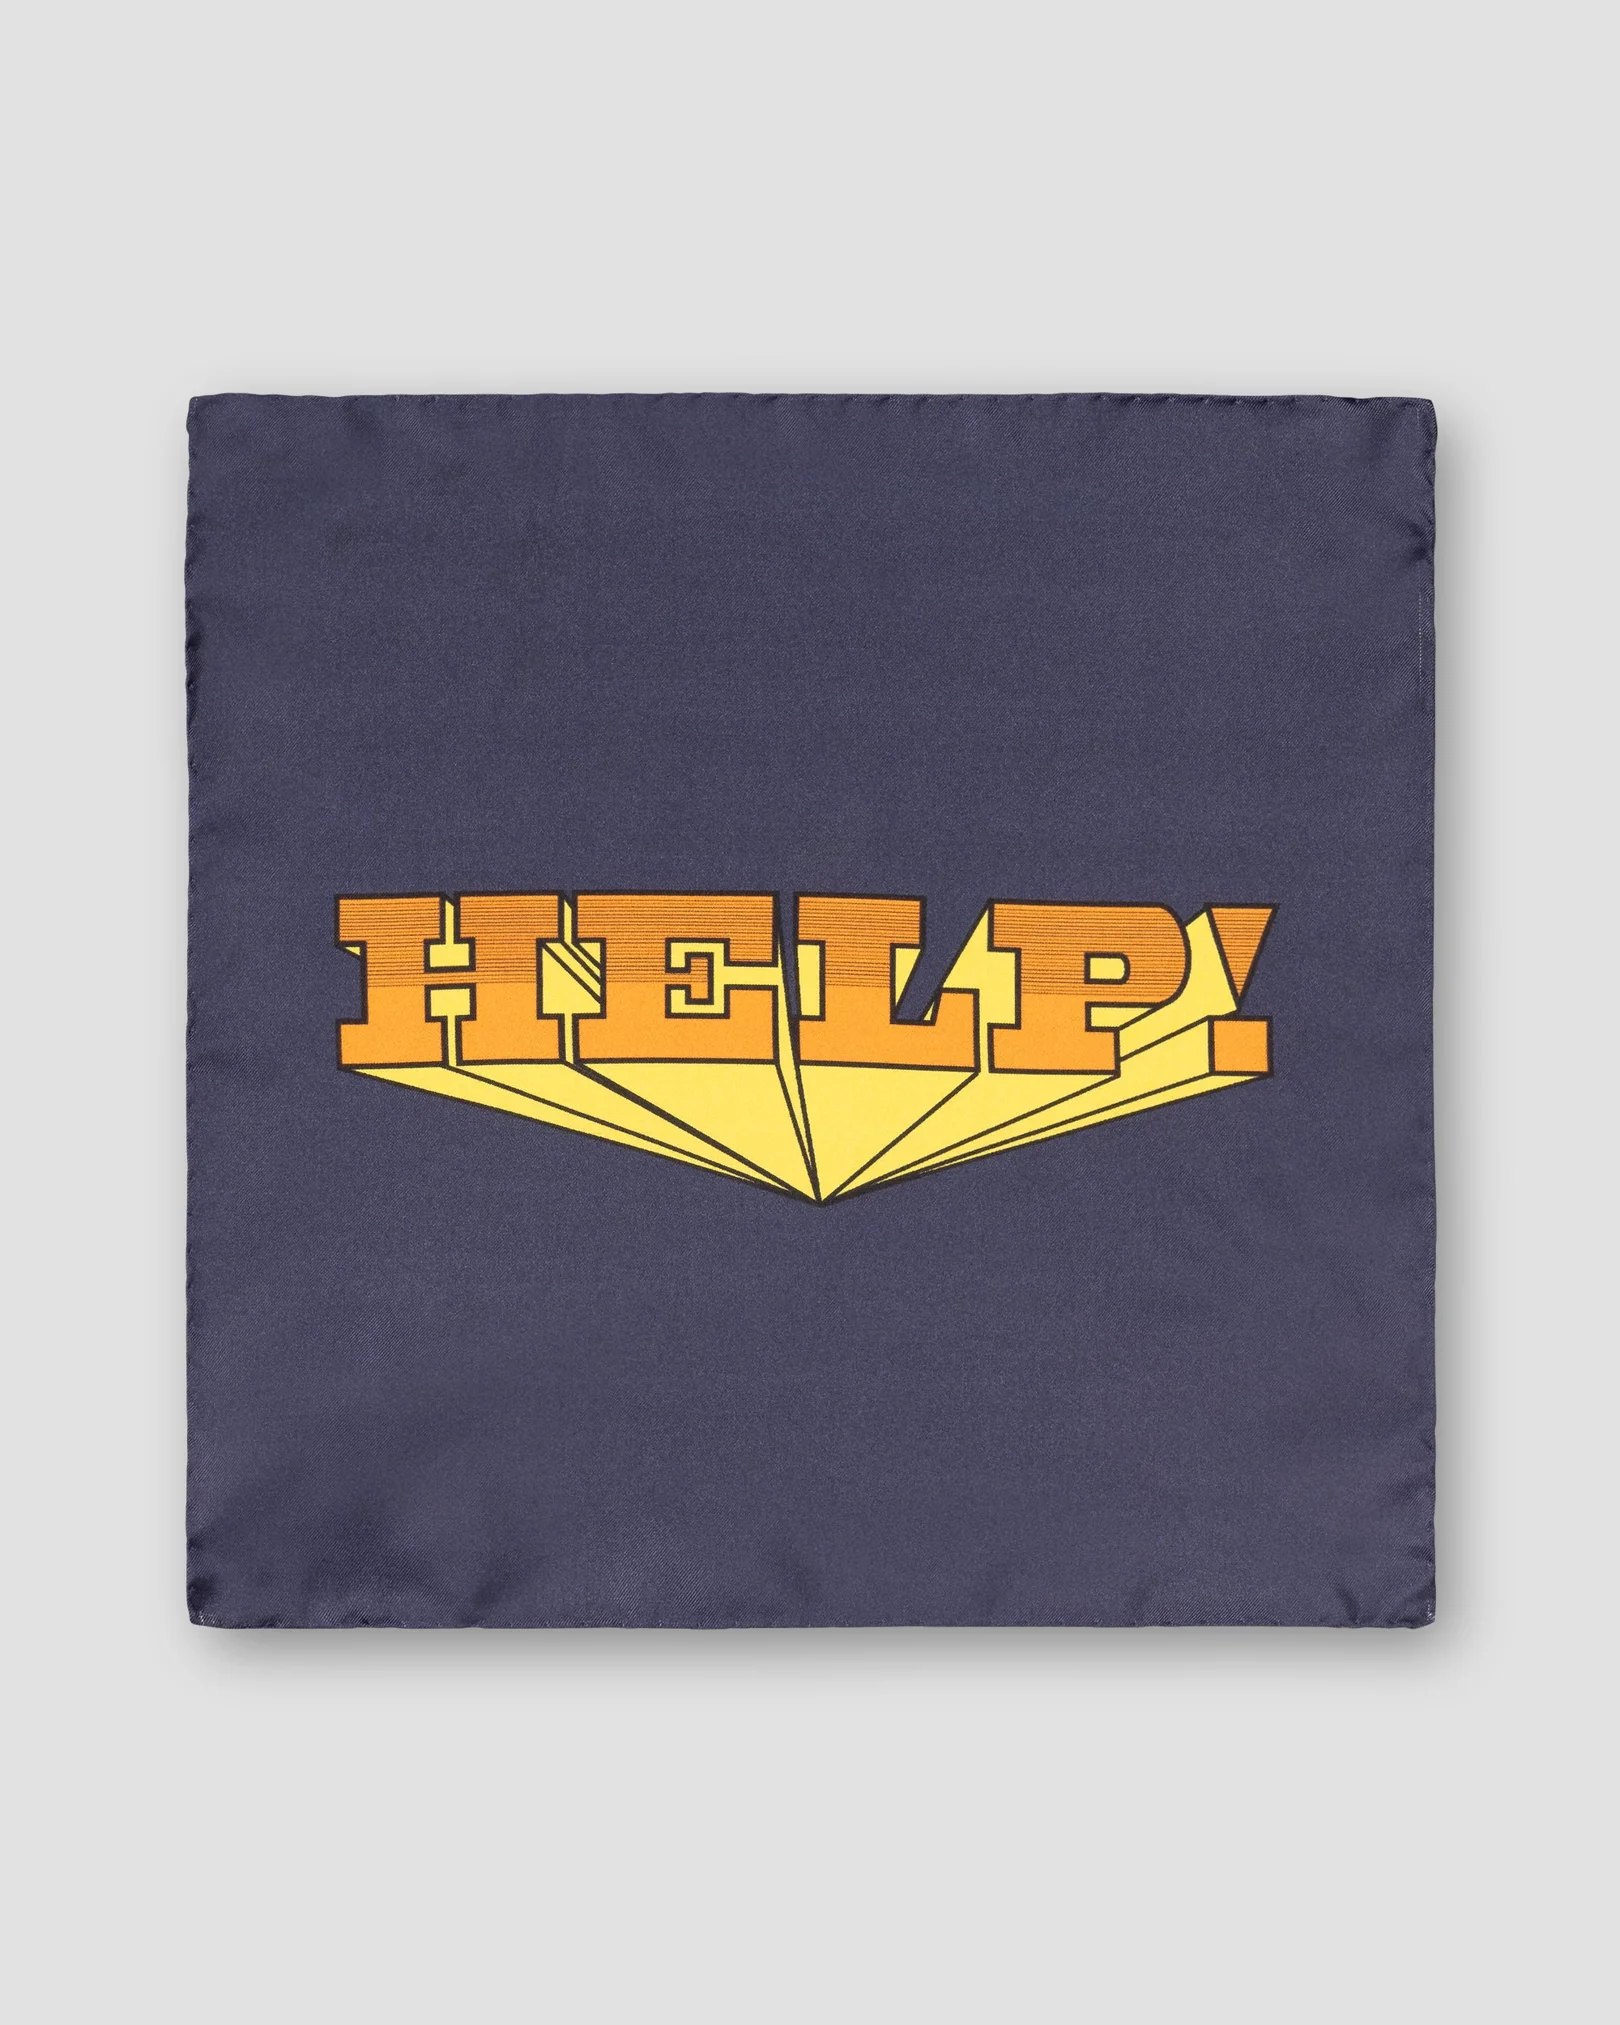 The Help! Pocket Square